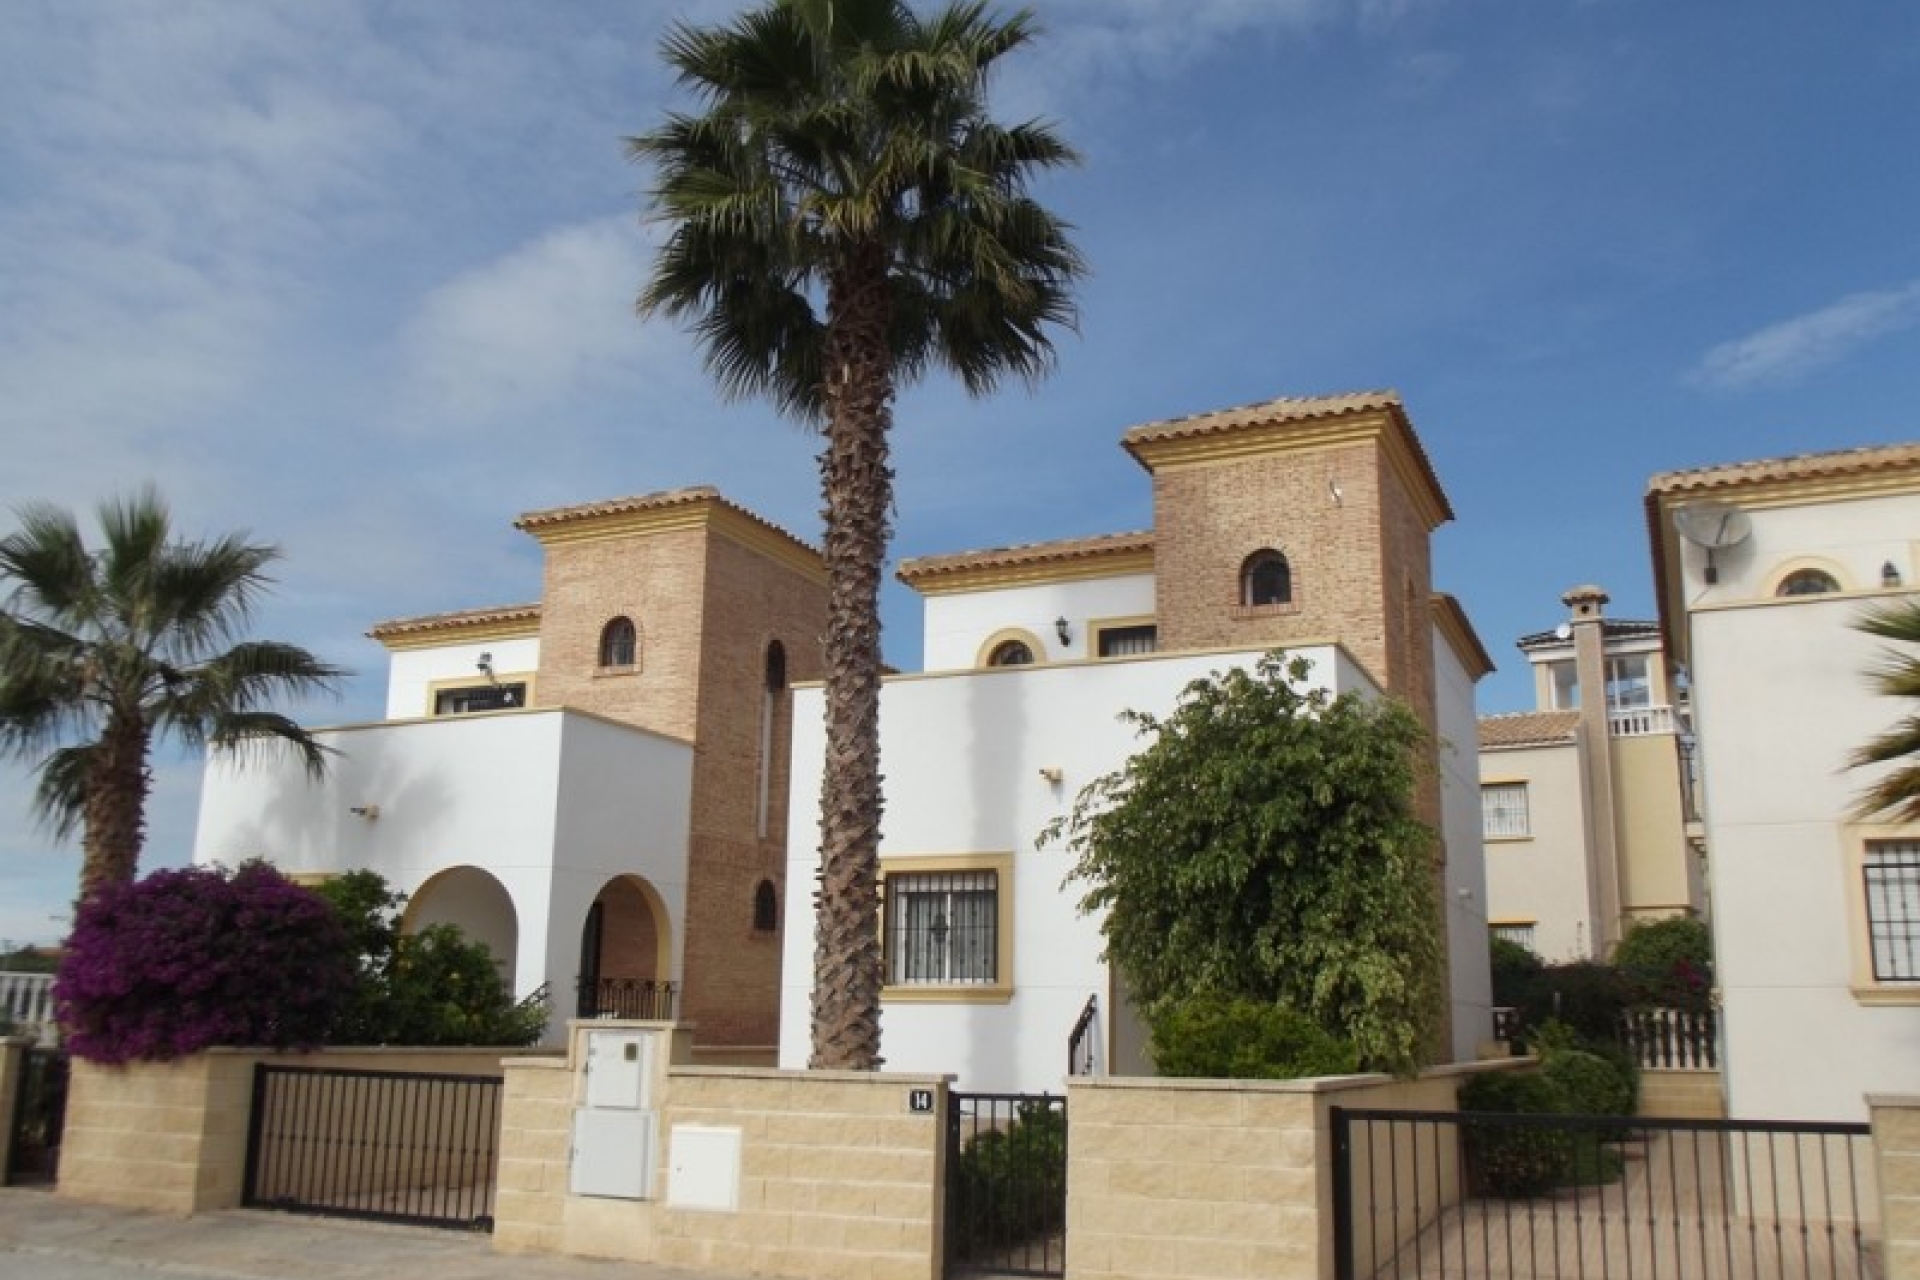 Cheap bargain property for sale Spain Costa Blanca